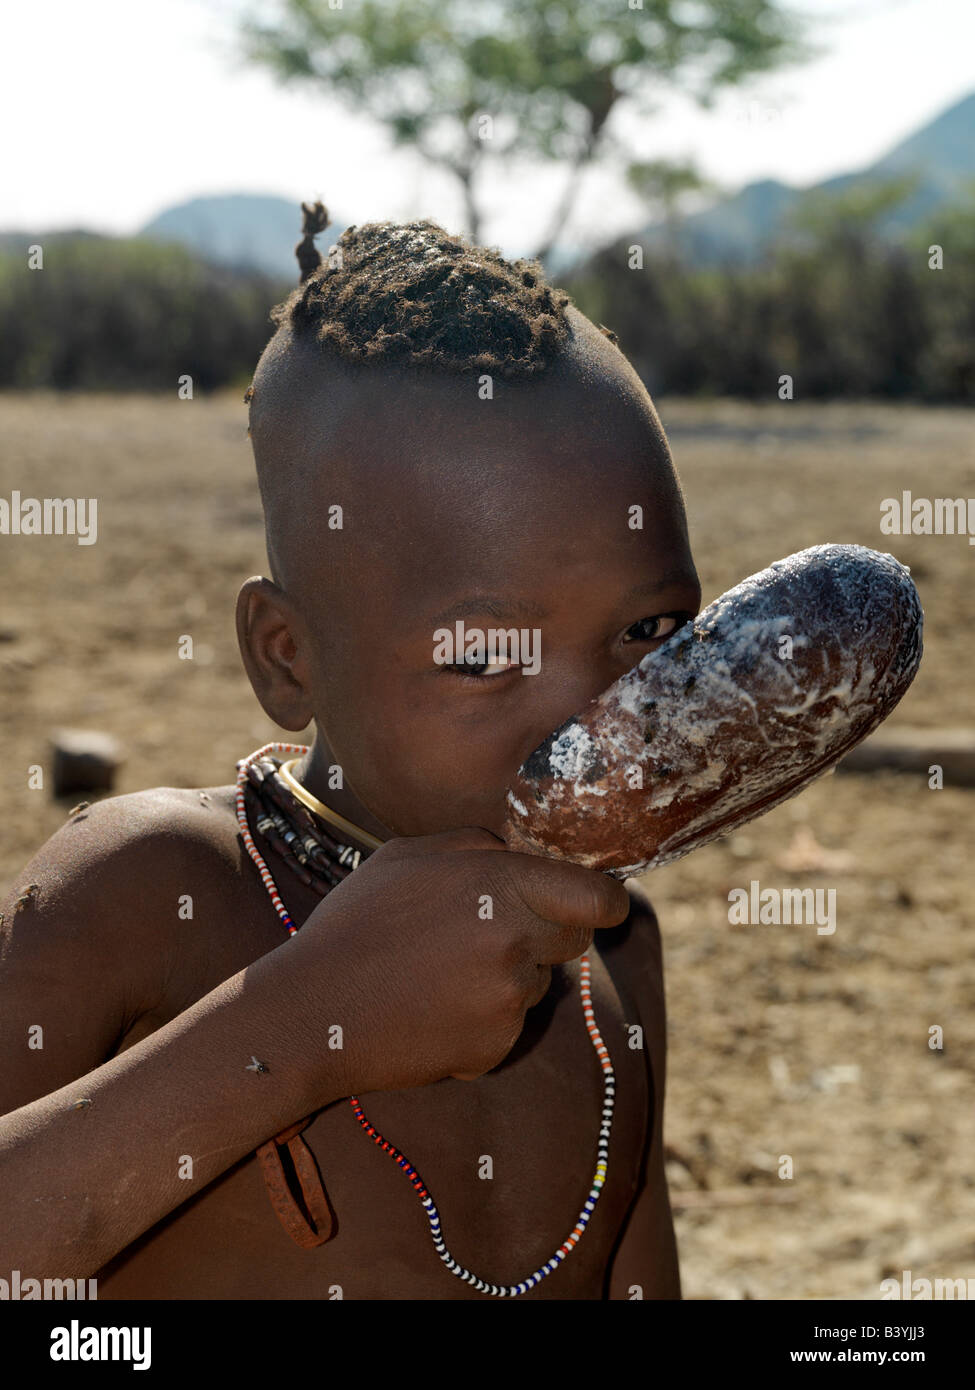 Namibia, Kaokoland. A Himba boy drinks milk from a wooden spoon. His hair is already being styled in a long plait, known as ondatu, which he will keep until he marries.The Himba are Herero-speaking Bantu nomads who live in the harsh, dry but starkly beautiful landscape of remote northwest Namibia. Stock Photo